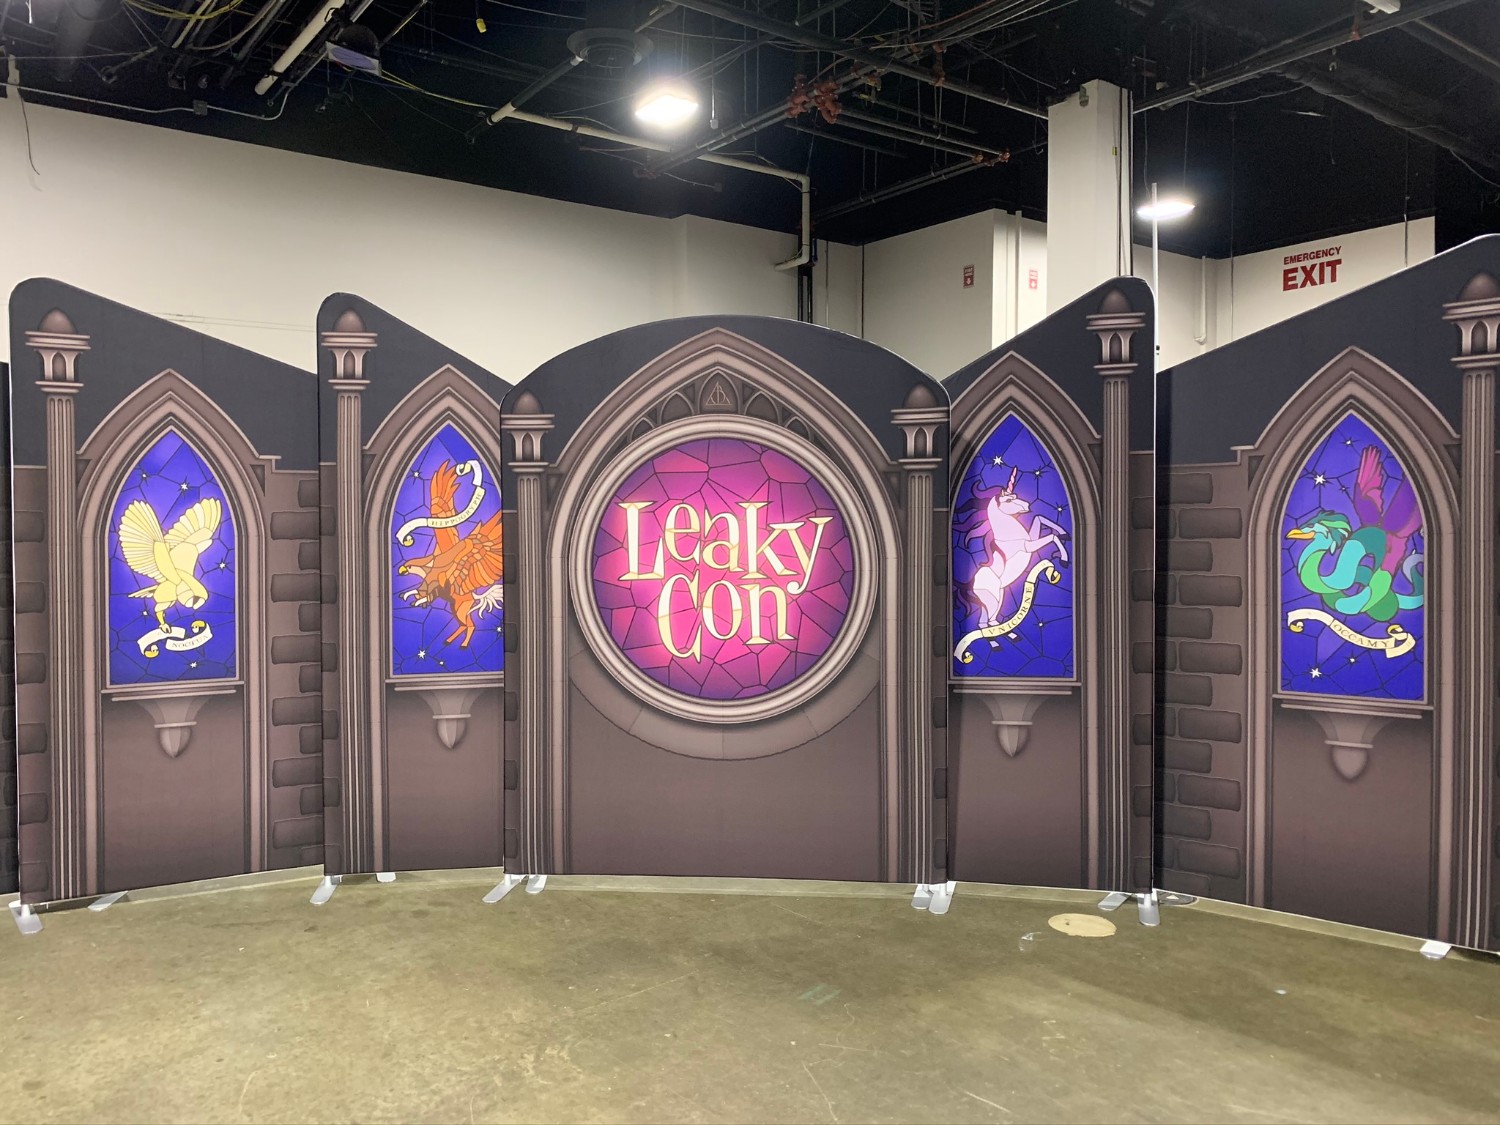 LeakyCon stained glass